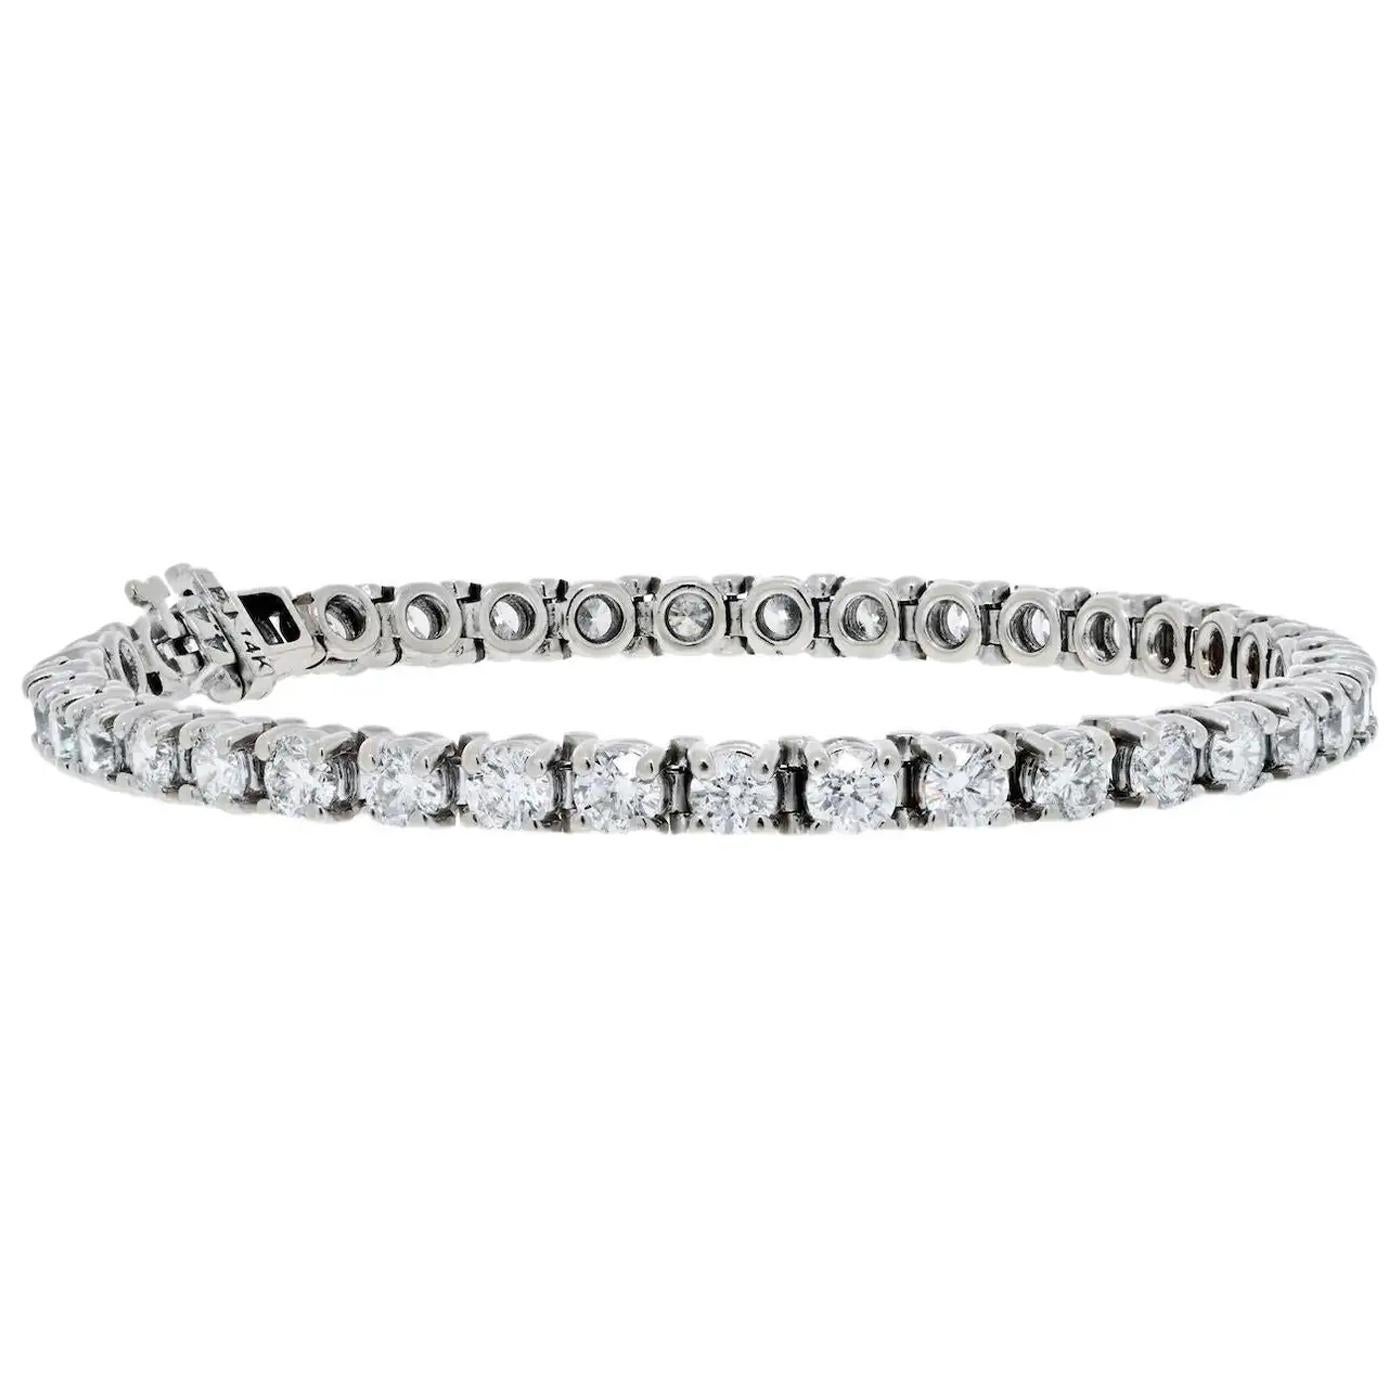 Tennis bracelet that every woman desires. This bracelet makes a beautiful mother for the bride or a bridal gift. Mounted in 14K White Gold finish that gives it a stunning shiny look that lasts for many years with 42 Round Cut Diamonds of 6.85ctw. It